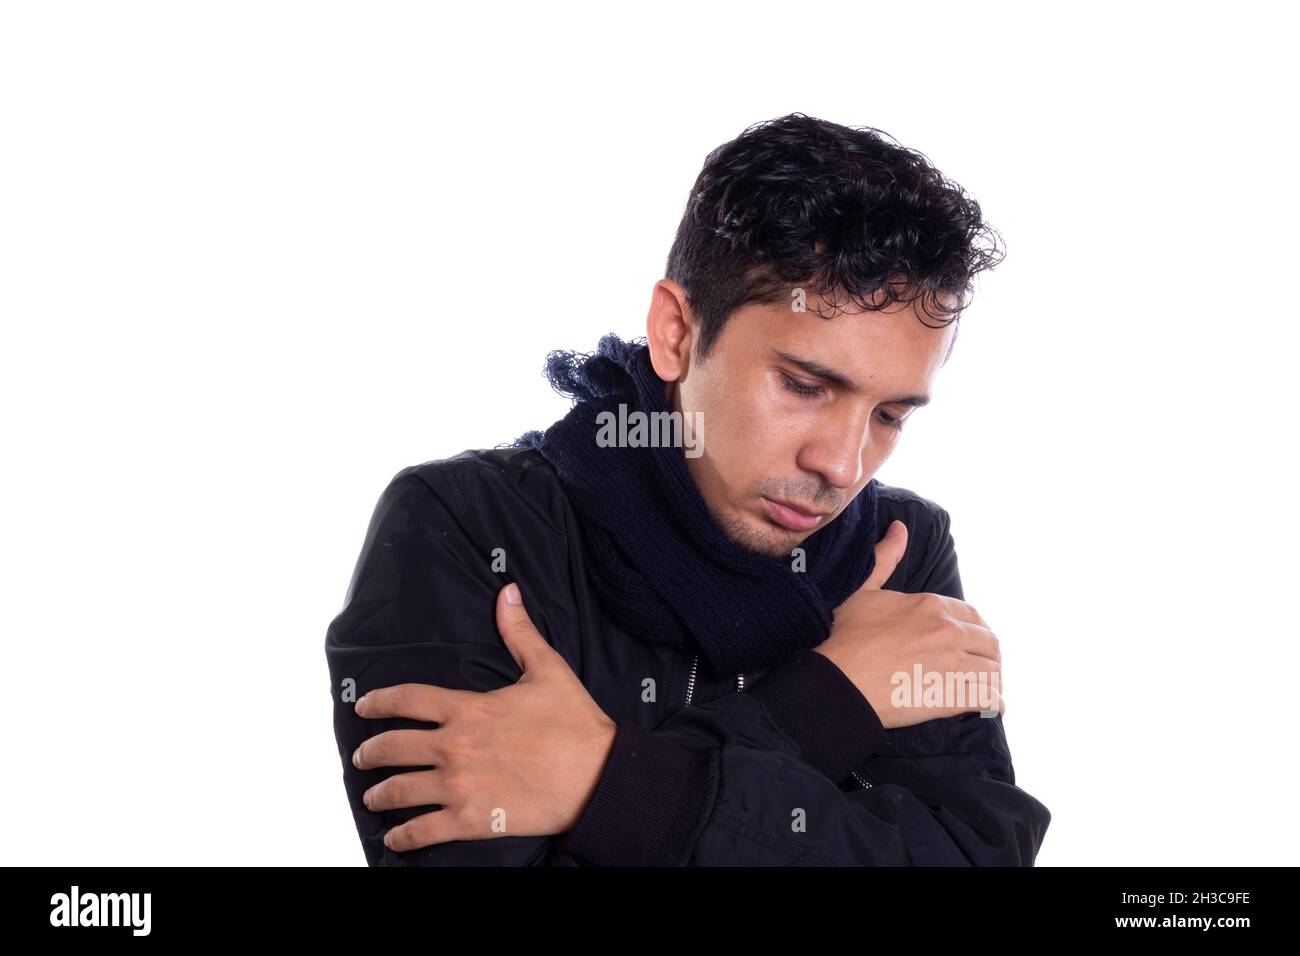 Man in very cold wearing a jacket and scarf, isolated on white background. Young adult can't stand so much cold. Stock Photo